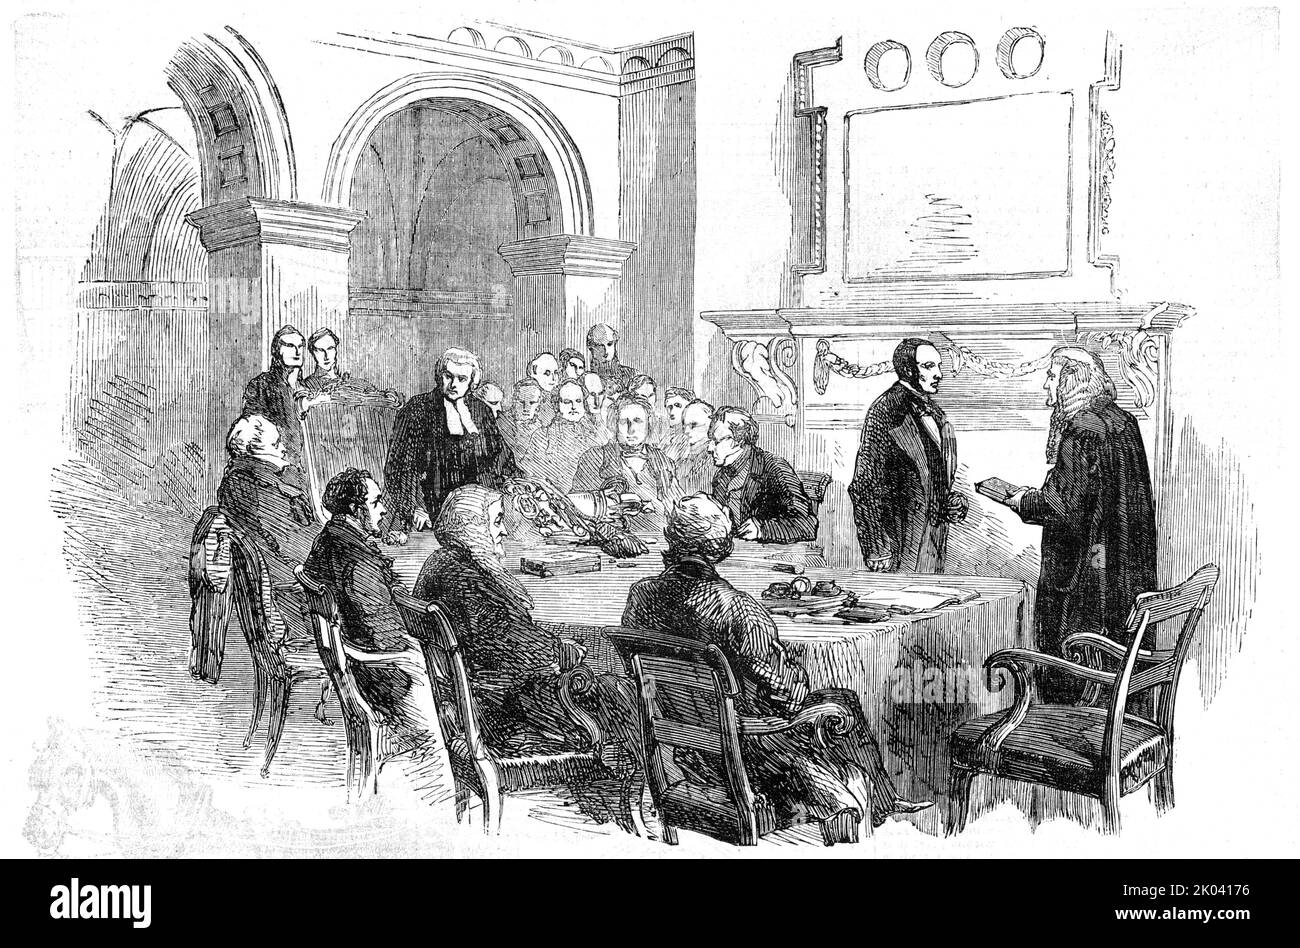 &quot;Trial of the Pyx&quot;, at the Office of the Comptroller-General of the Exchequer, Whitehall, 1854. 'The trial takes place in the principal apartment of the Exchequer-office, in Whitehall-yard....The Lord Chancellor is seated in a carved chair, with the Privy Councillors at the board, or table; and the stage of the proceeding represented by our Artist is the Remembrancer administering the oath to the Jury...The, Lord Chancellor, in addressing the Jury, said the object for the attainment of which they had assembled was one of very great importance - namely, the securing of the due rate of Stock Photo